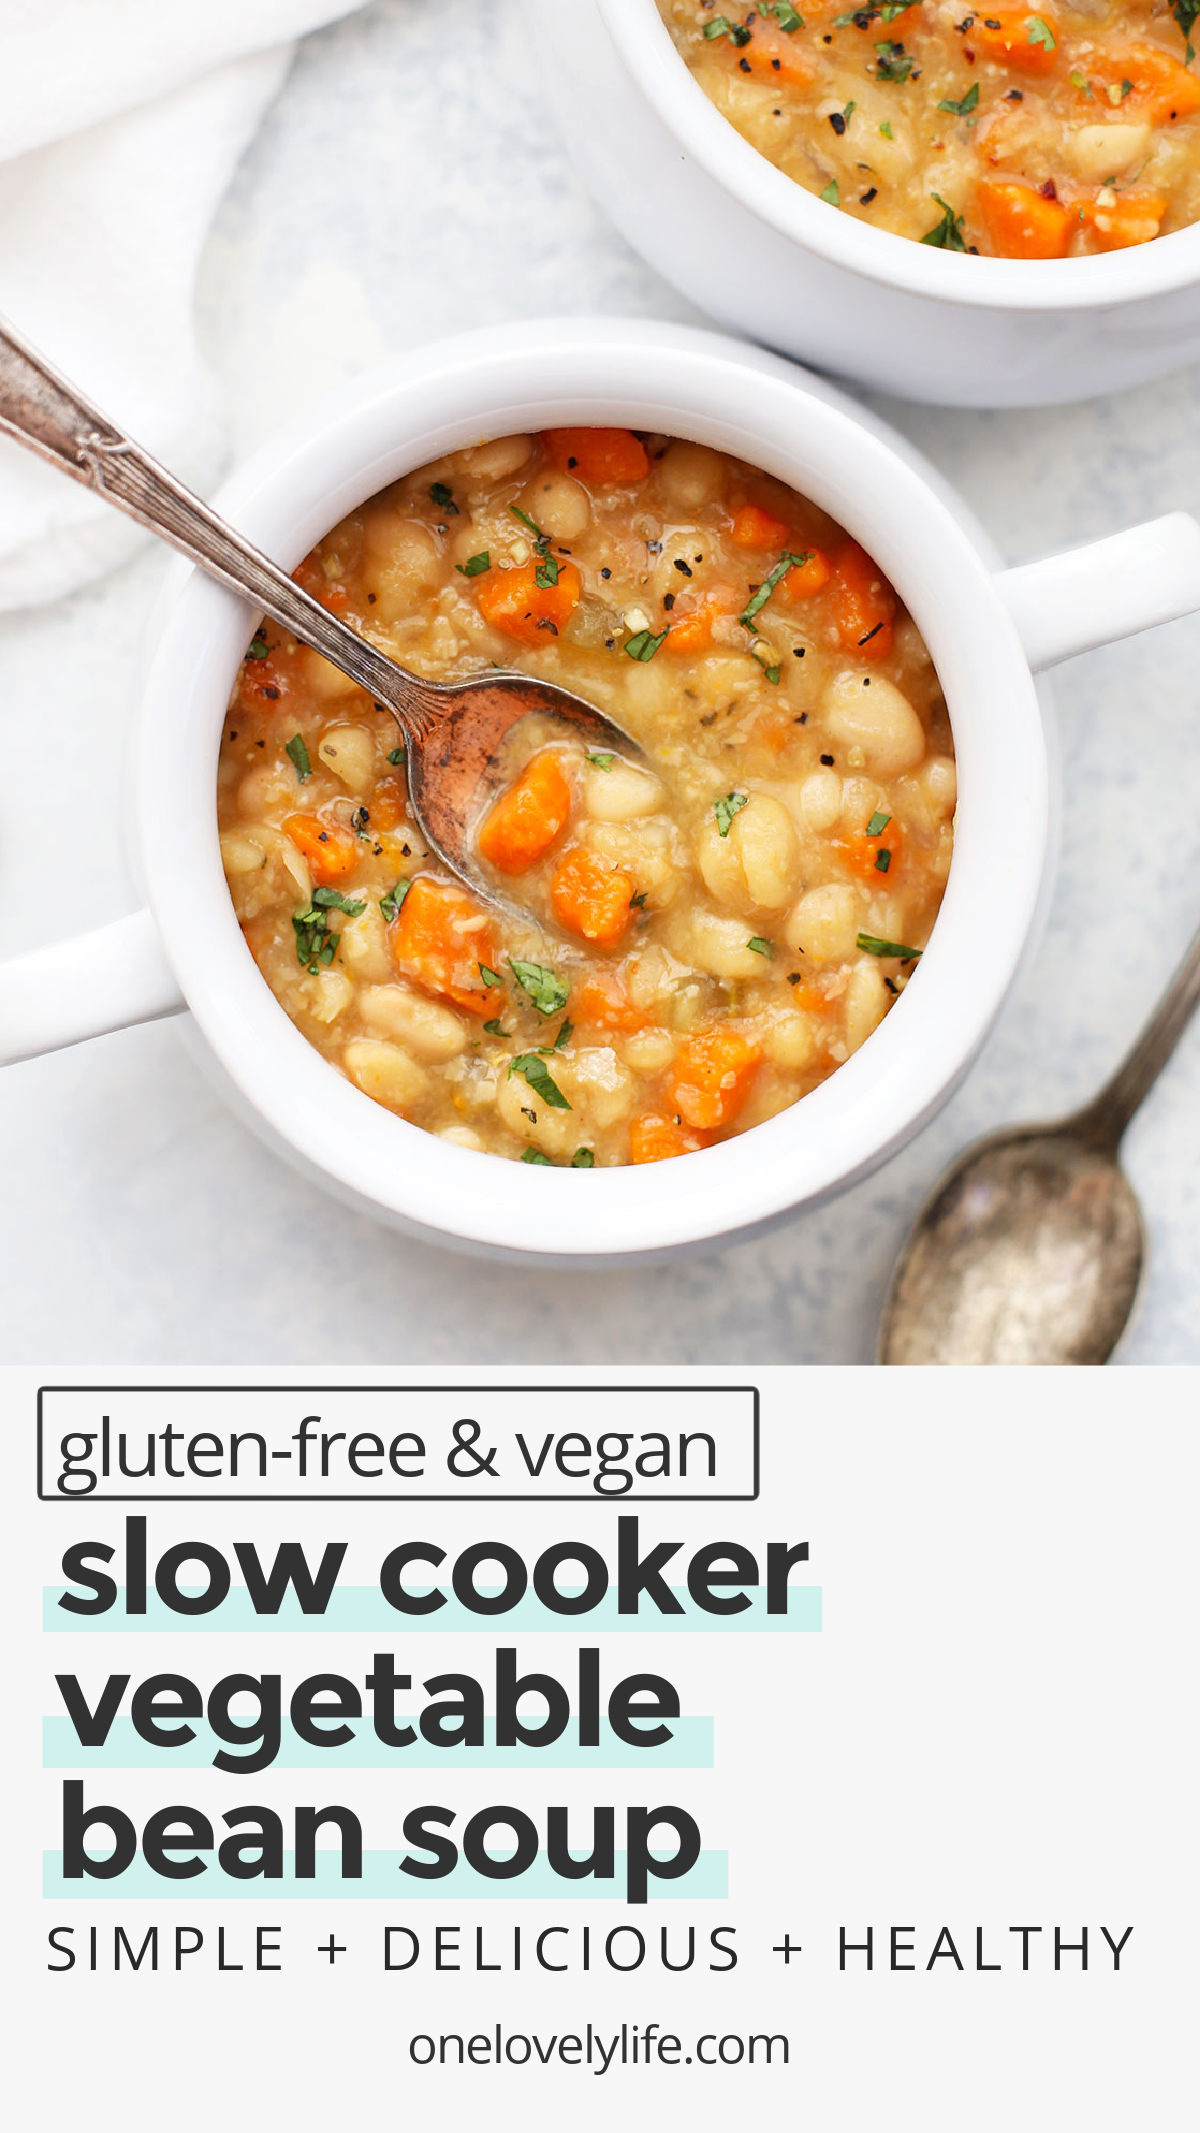 Slow Cooker Vegetable Bean Soup - Sometimes the easiest recipes are the best! This vegetable bean soup is made in a slow cooker and has the perfect cozy blend of flavors. We love this so much! (Gluten Free & Vegan) // Crock Pot Vegetable Bean Soup // Slow Cooker Soup Recipe // Crock Pot Soup Recipe // Vegan Slow Cooker Recipe // Vegetarian Slow Cooker Recipe // Vegan Soup // Vegetarian Soup // Bean Soup #beansoup #slowcookersoup #vegansoup #vegetablesoup #vegetariansoup #glutenfree #slowcooker